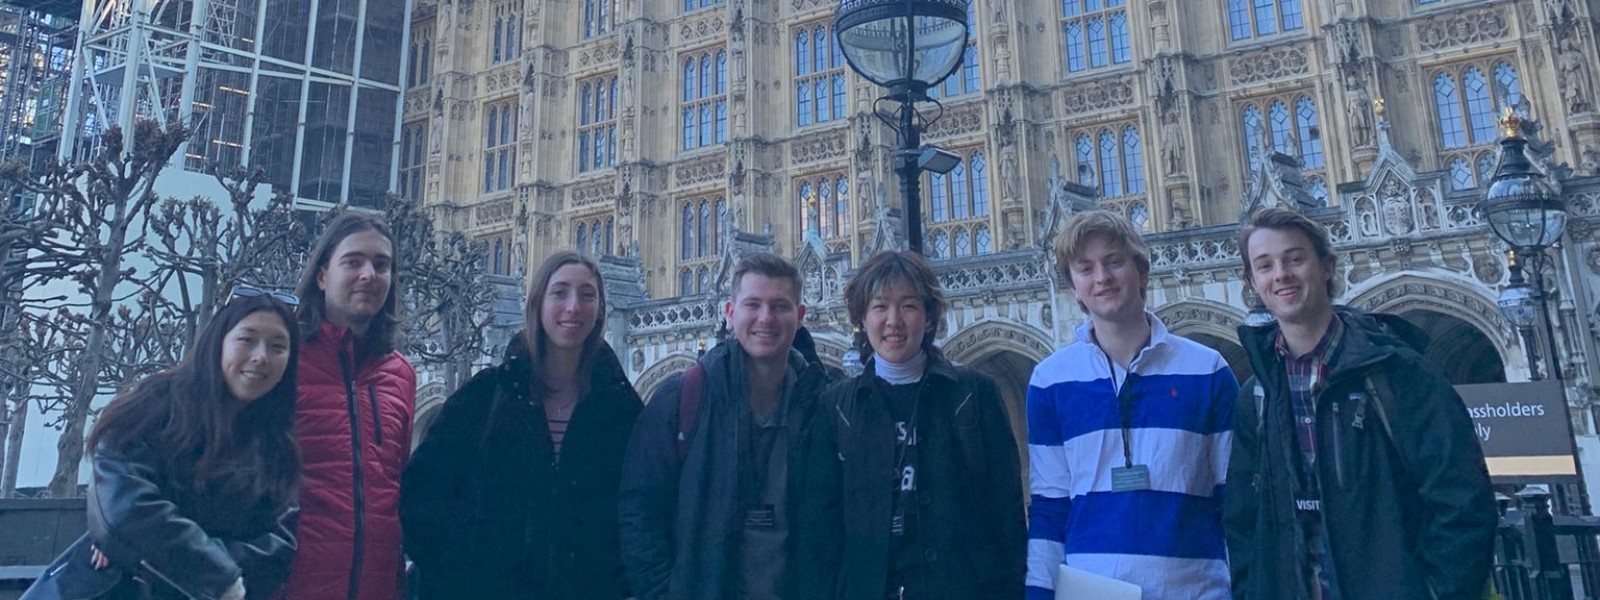 Seven students stand together outside, with Big Ben in the background.